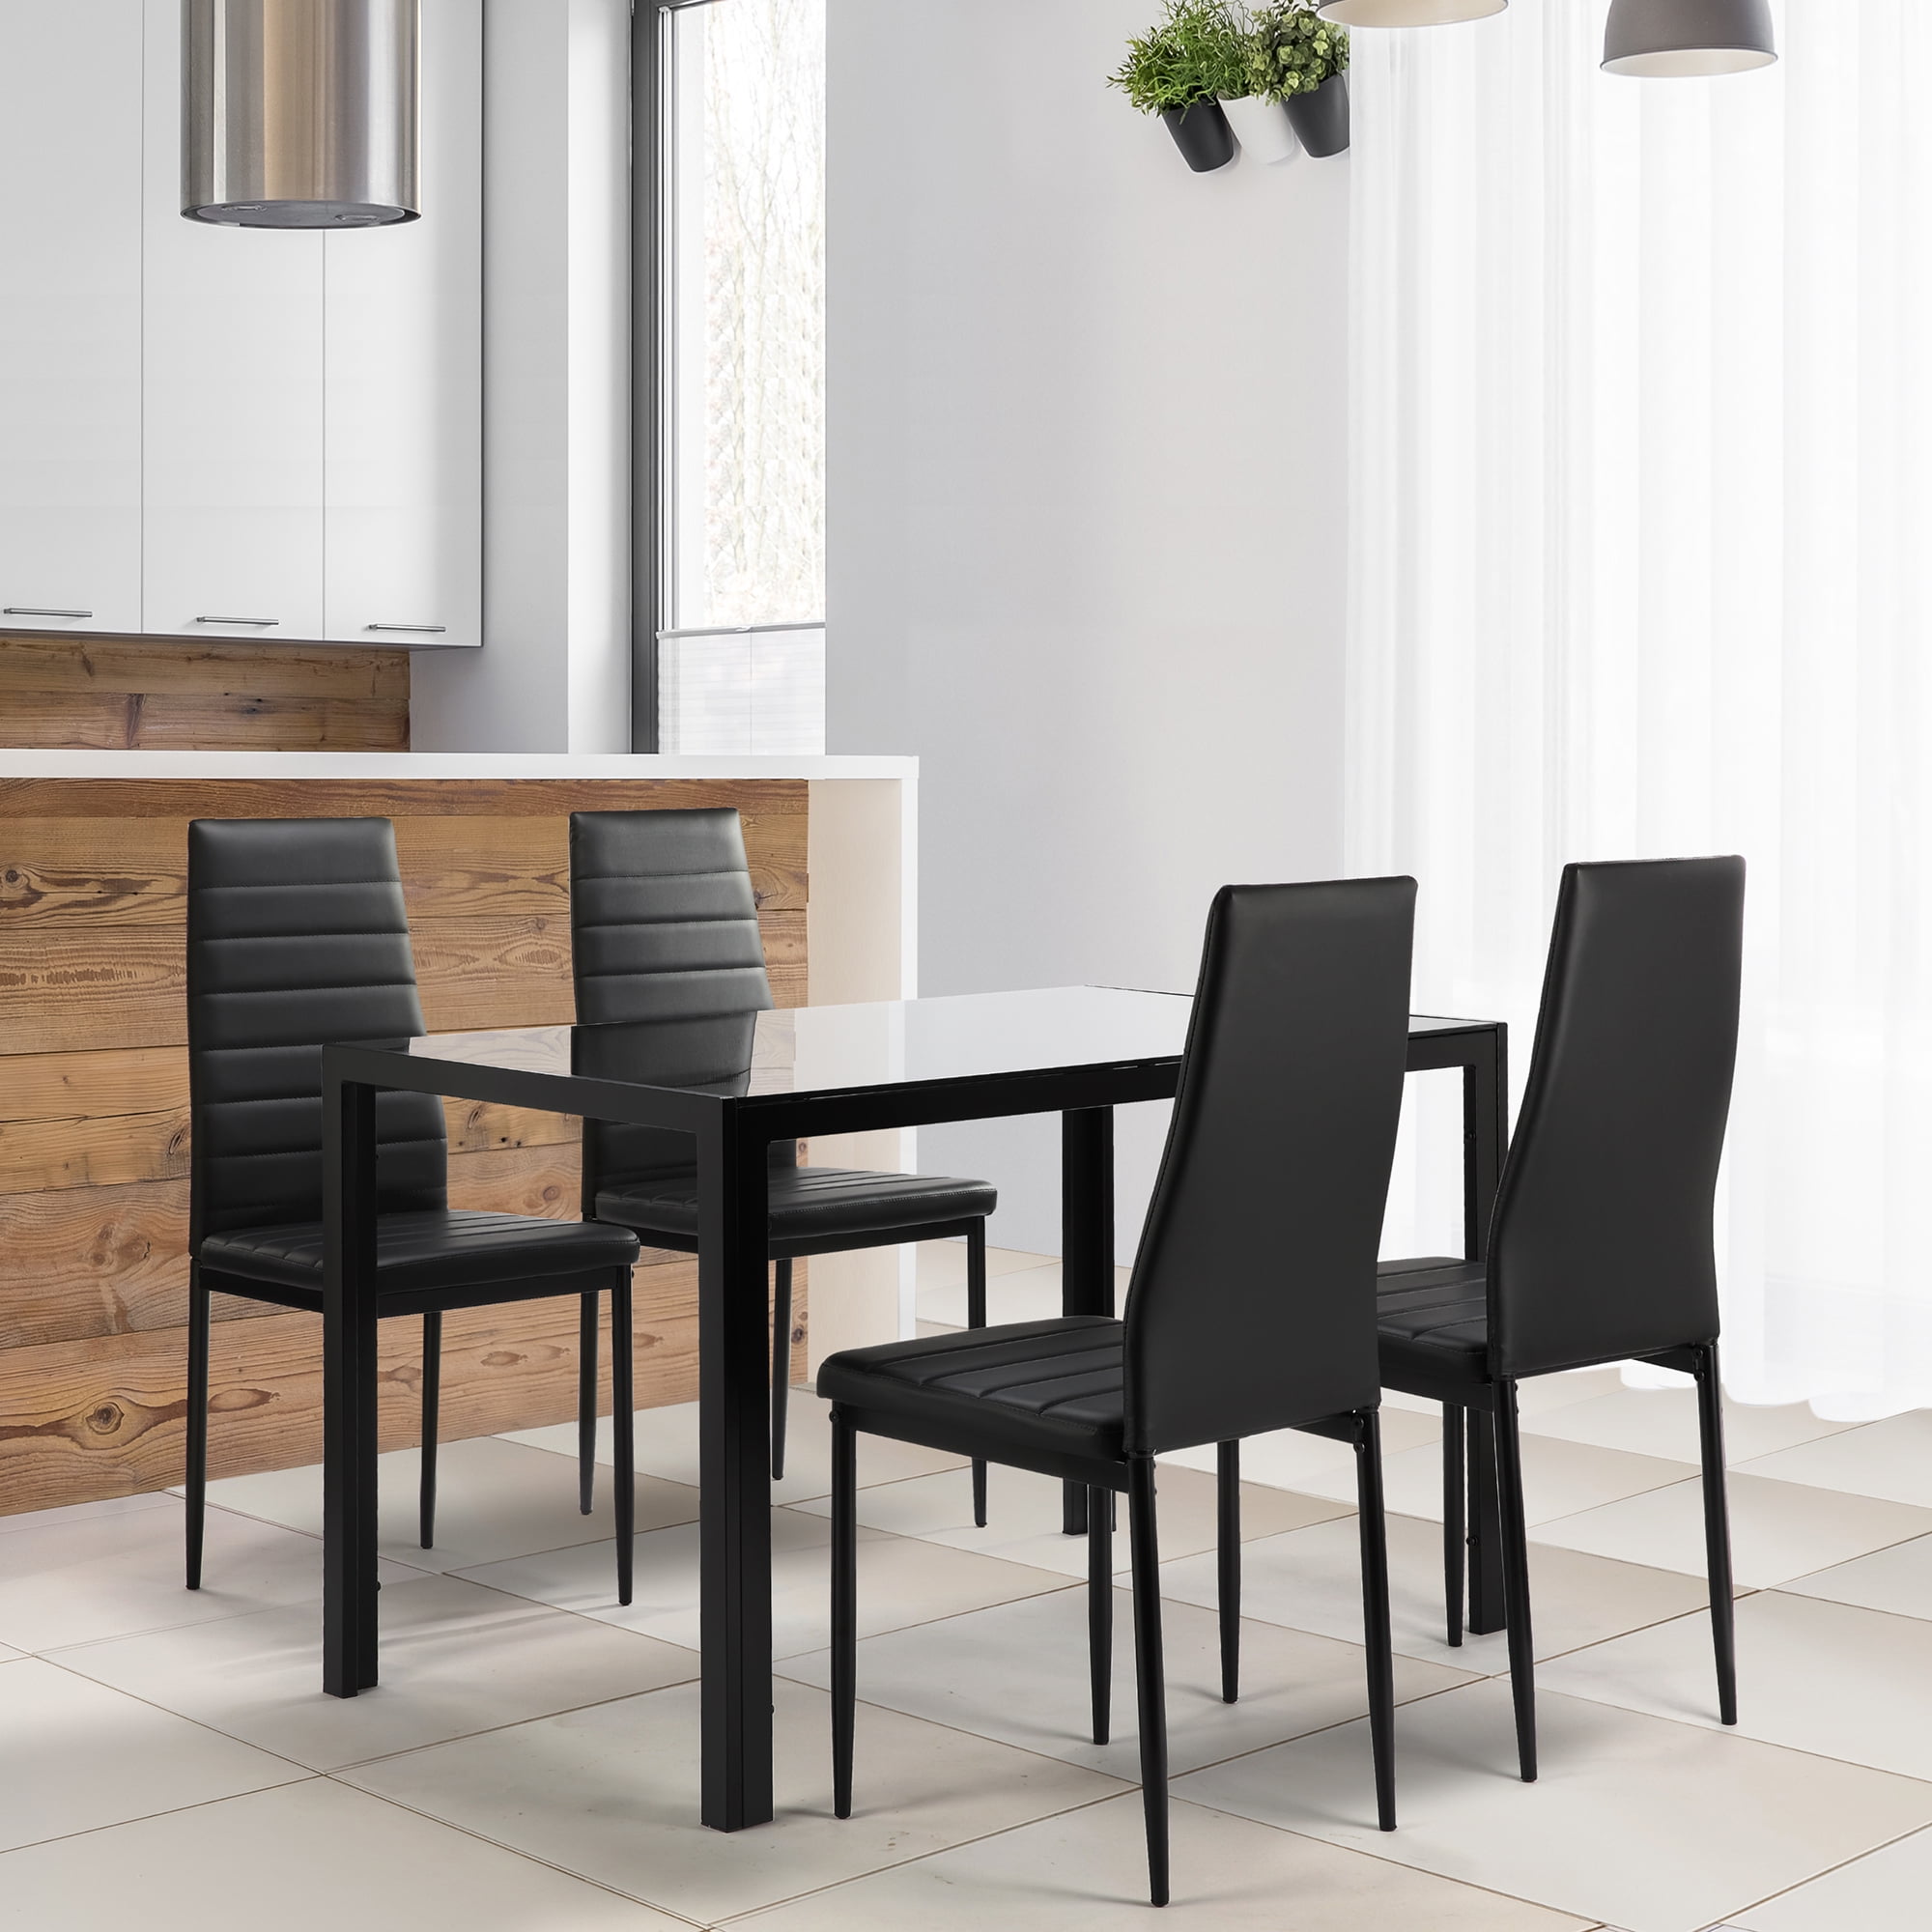 5 Piece Dining Table Set Btmway, Leather Kitchen Table Set